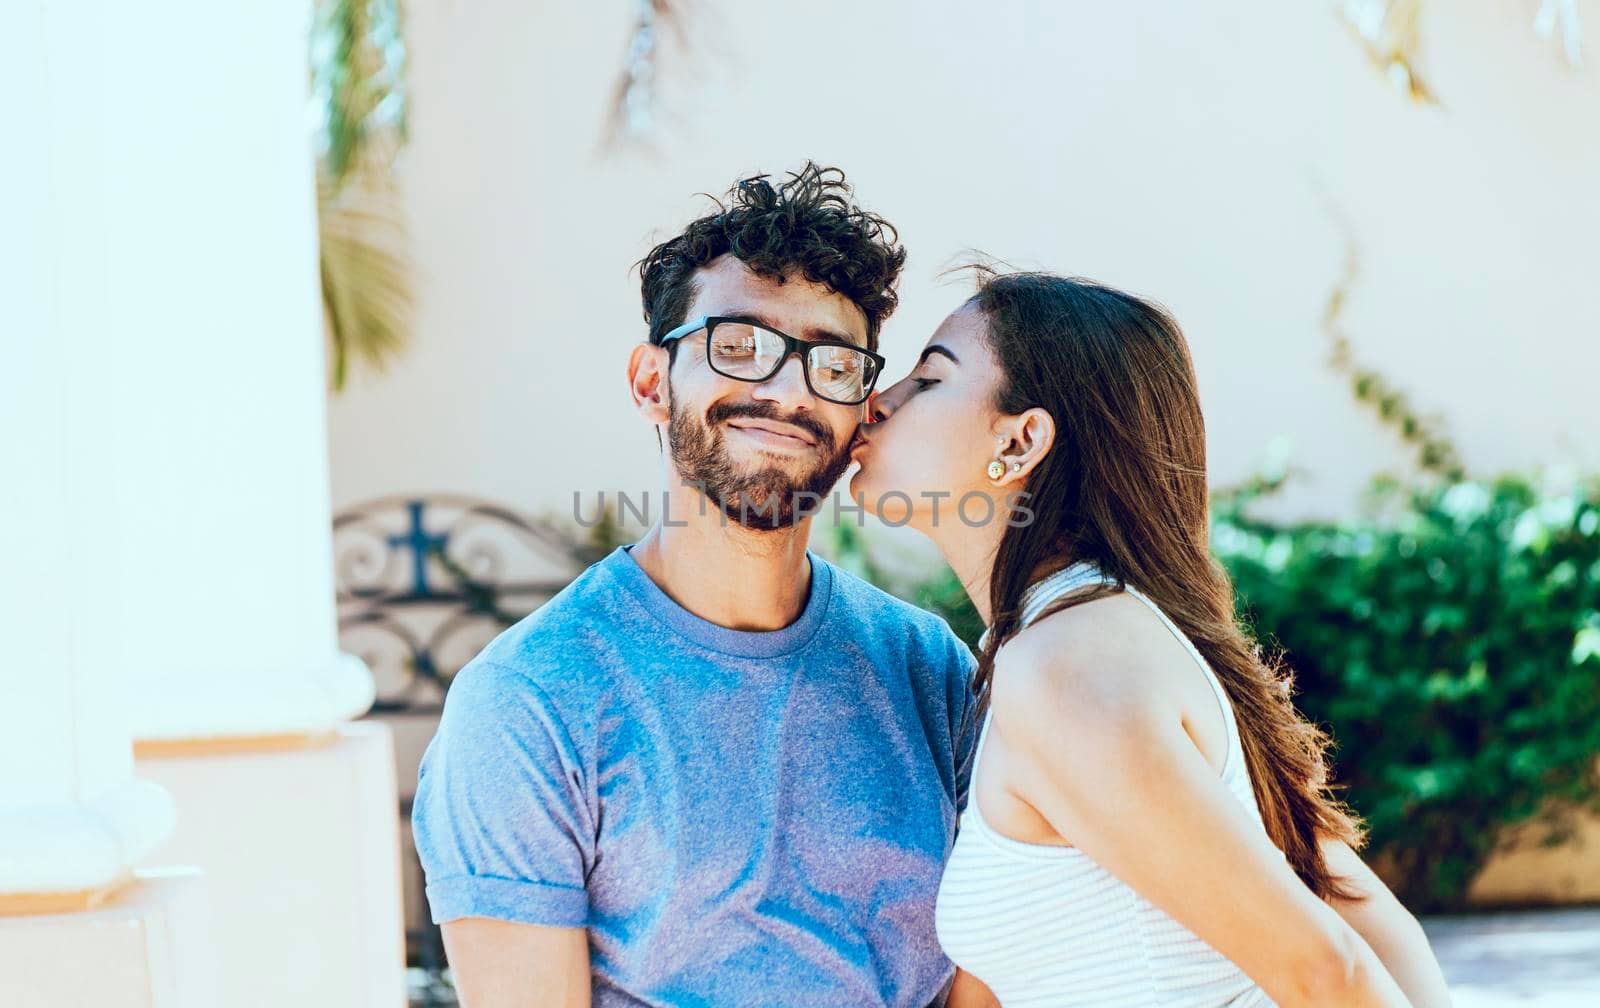 Girl kissing her boyfriend on the cheek while smiling. Young woman kissing her boyfriend on the cheek in the street. Concept of happy girlfriend kissing cheek of her boyfriend outdoors by isaiphoto